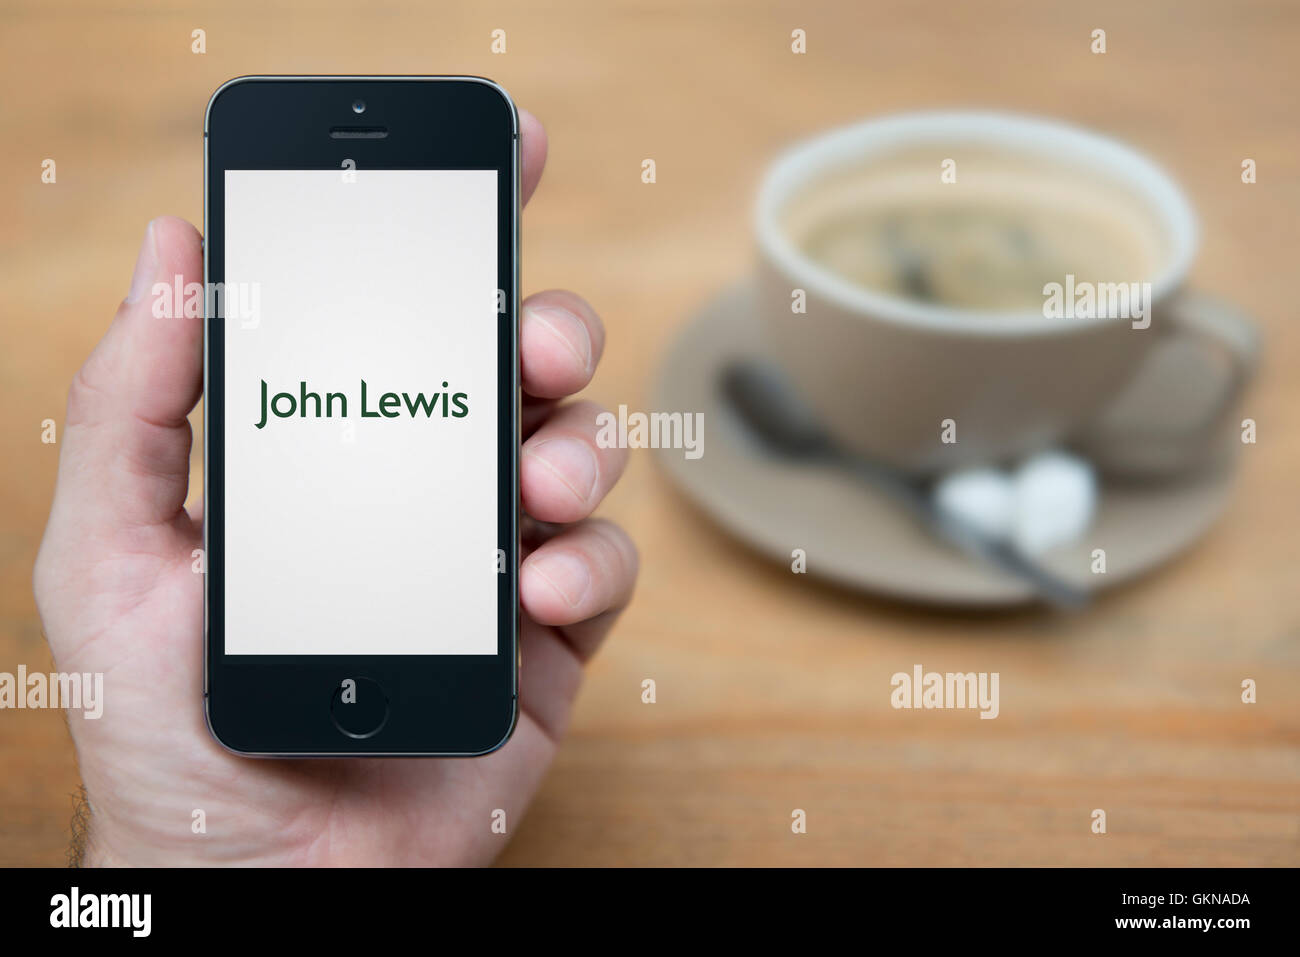 A man looks at his iPhone which displays the John Lewis logo, while sat with a cup of coffee (Editorial use only). Stock Photo